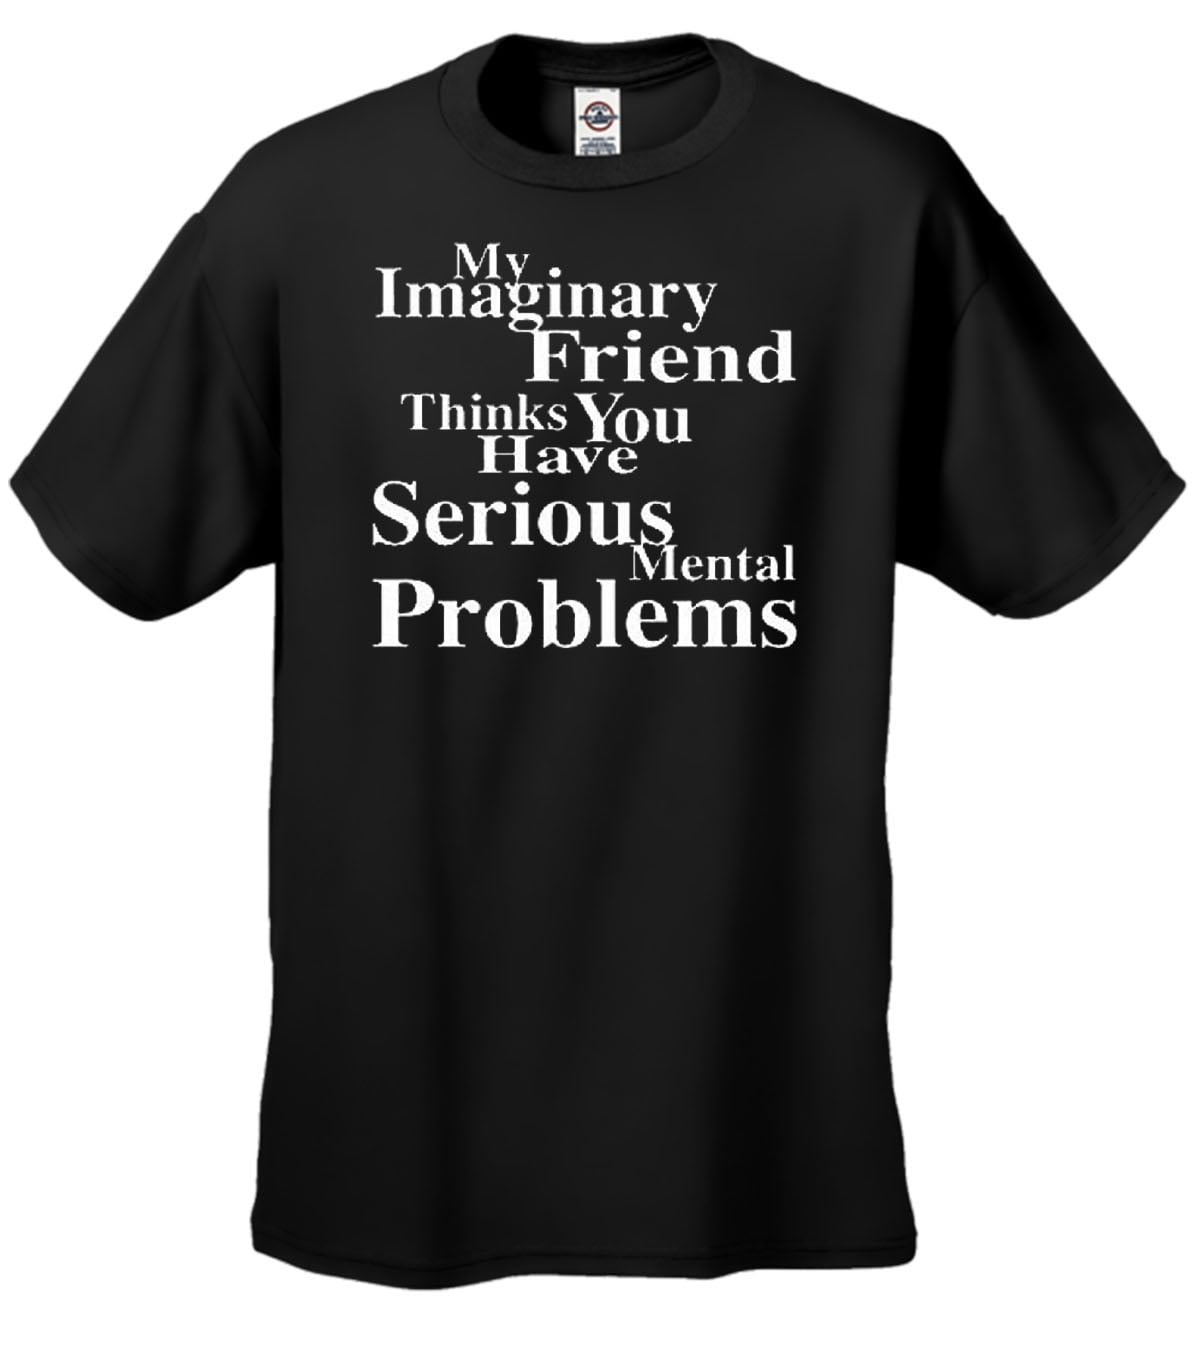 Funny friends футболка. Funny t-Shirt. Burn your problems футболка. Квизлет think seriously.